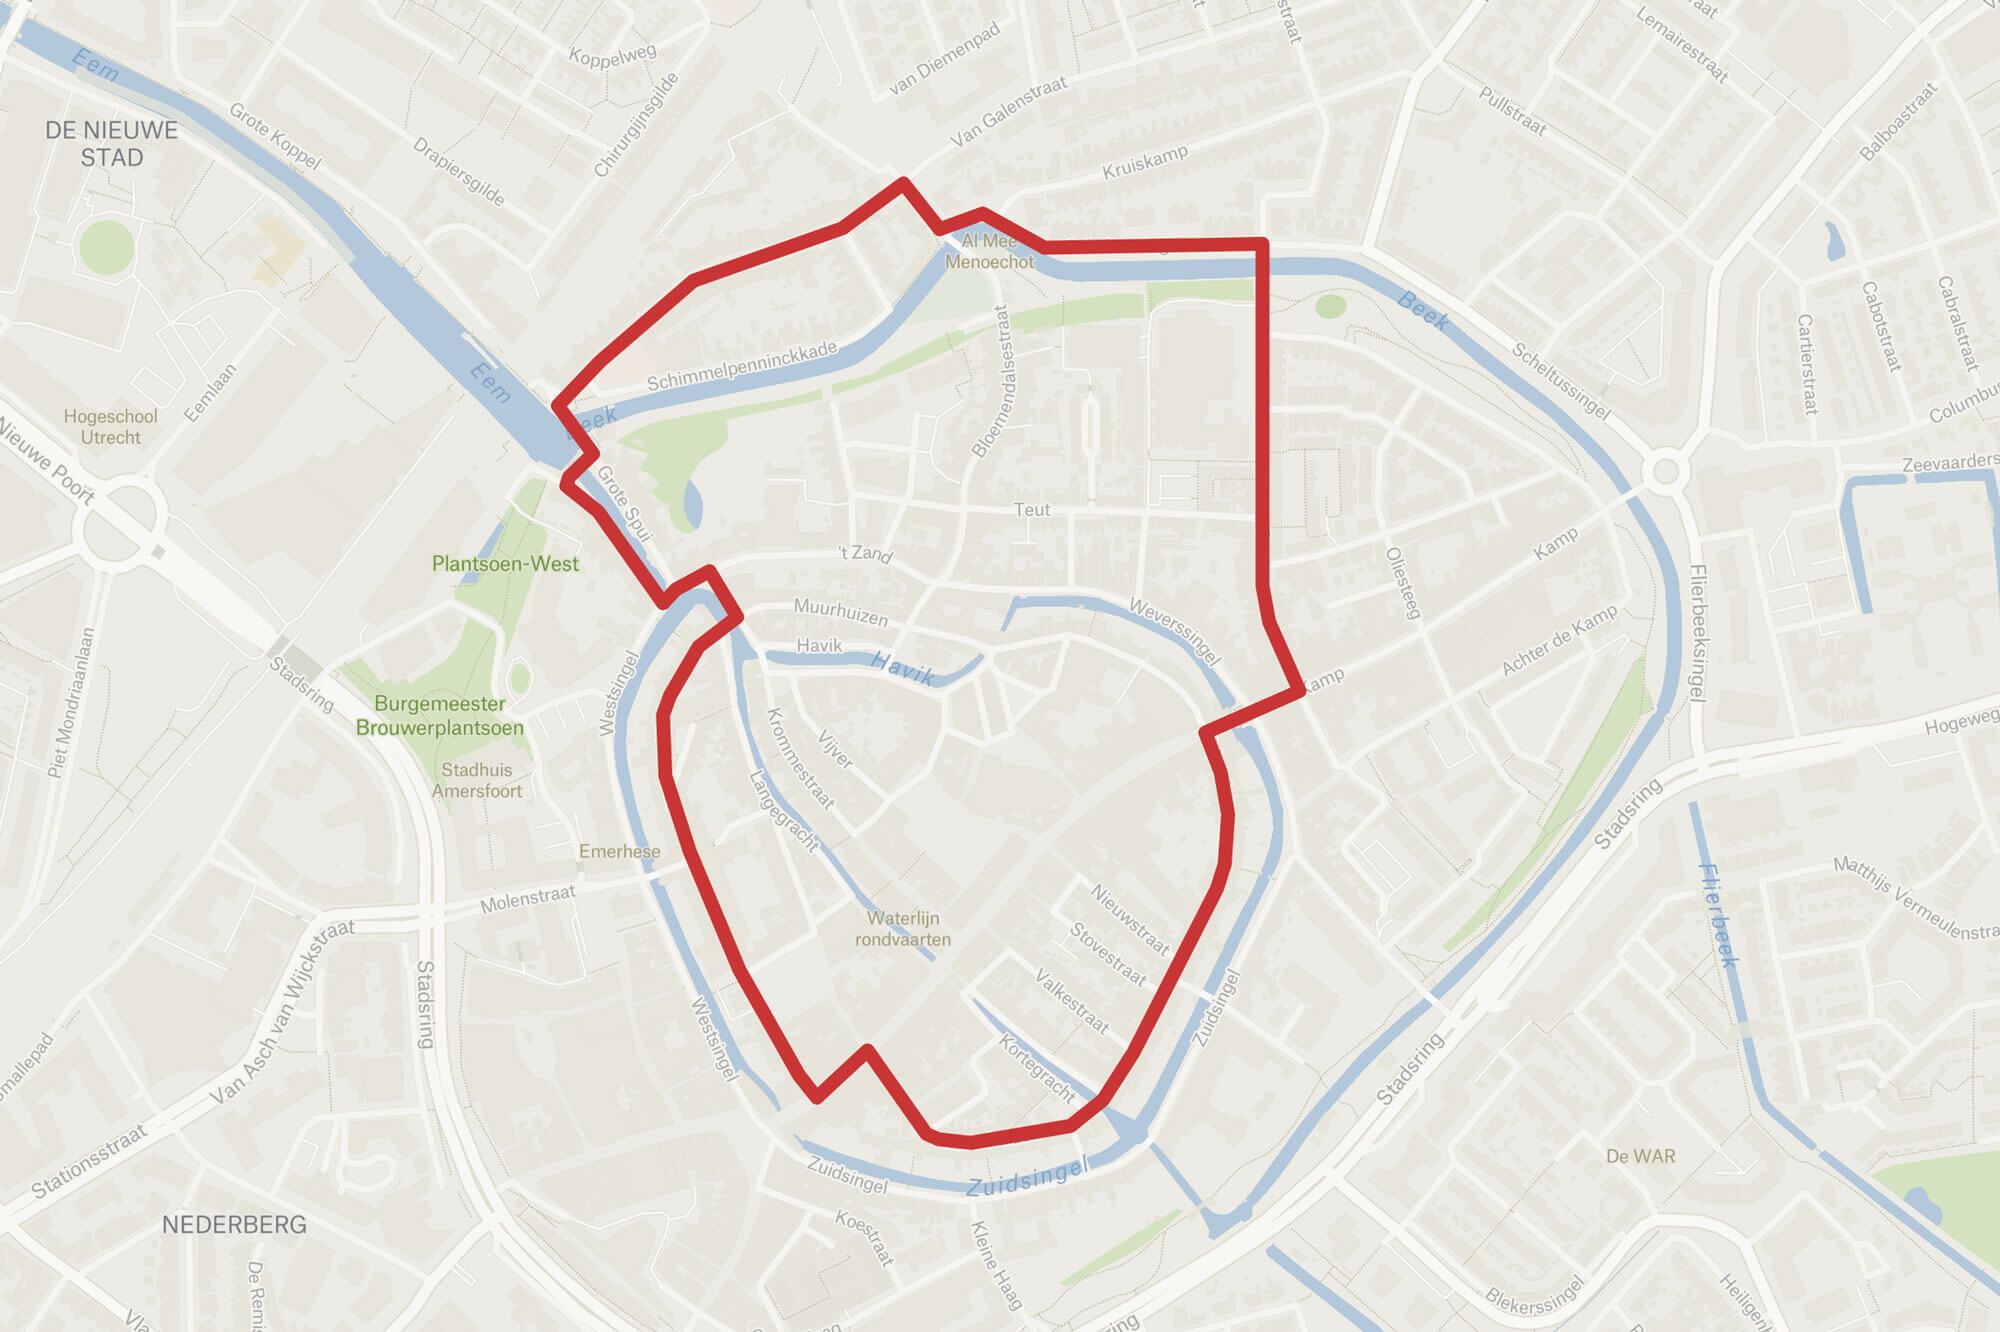 A map of the route through Amersfoort